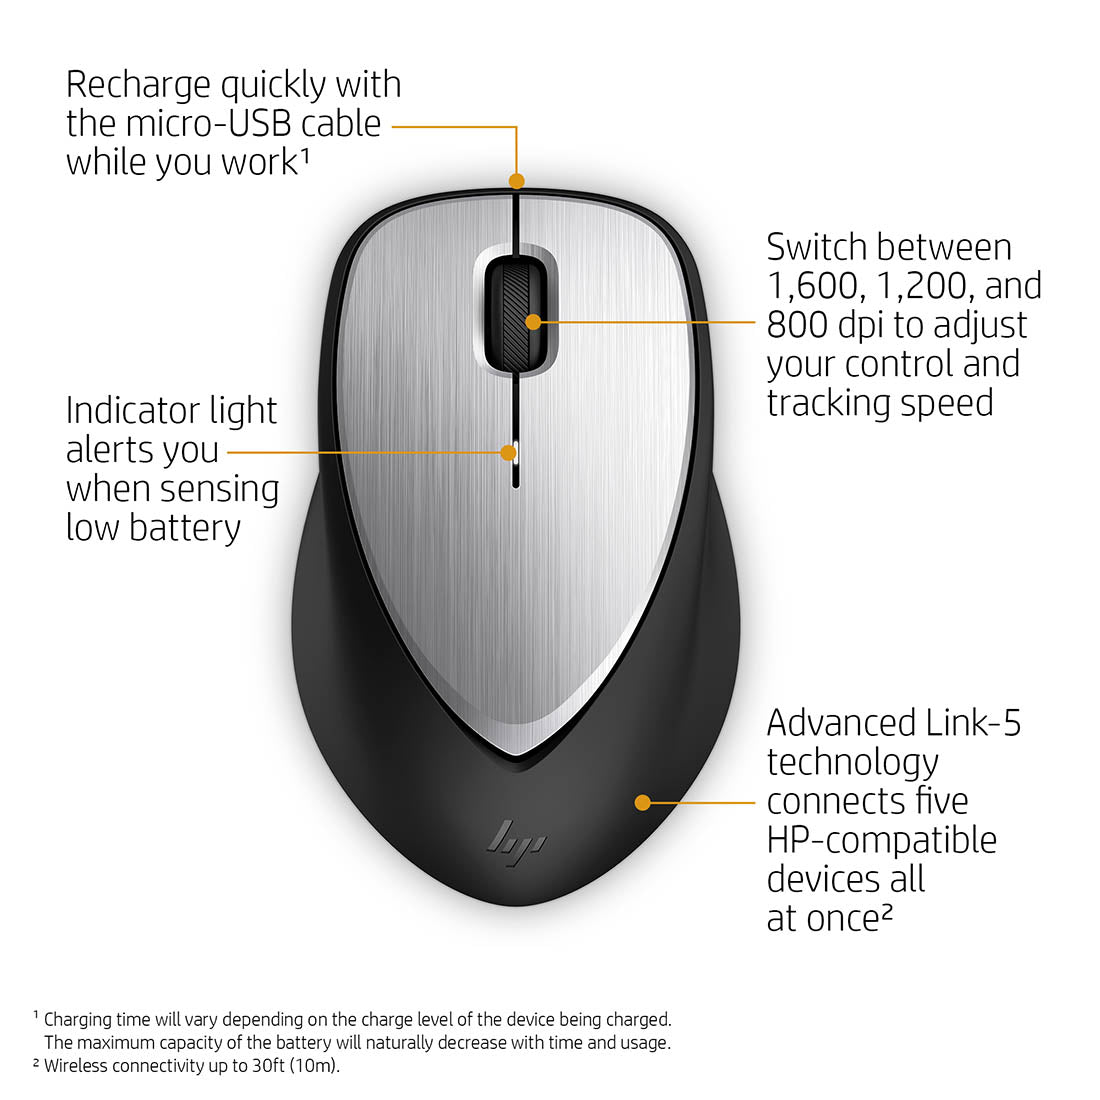 HP Envy 500 Rechargeable Wireless Mouse with Power Backup up to 11 Weeks